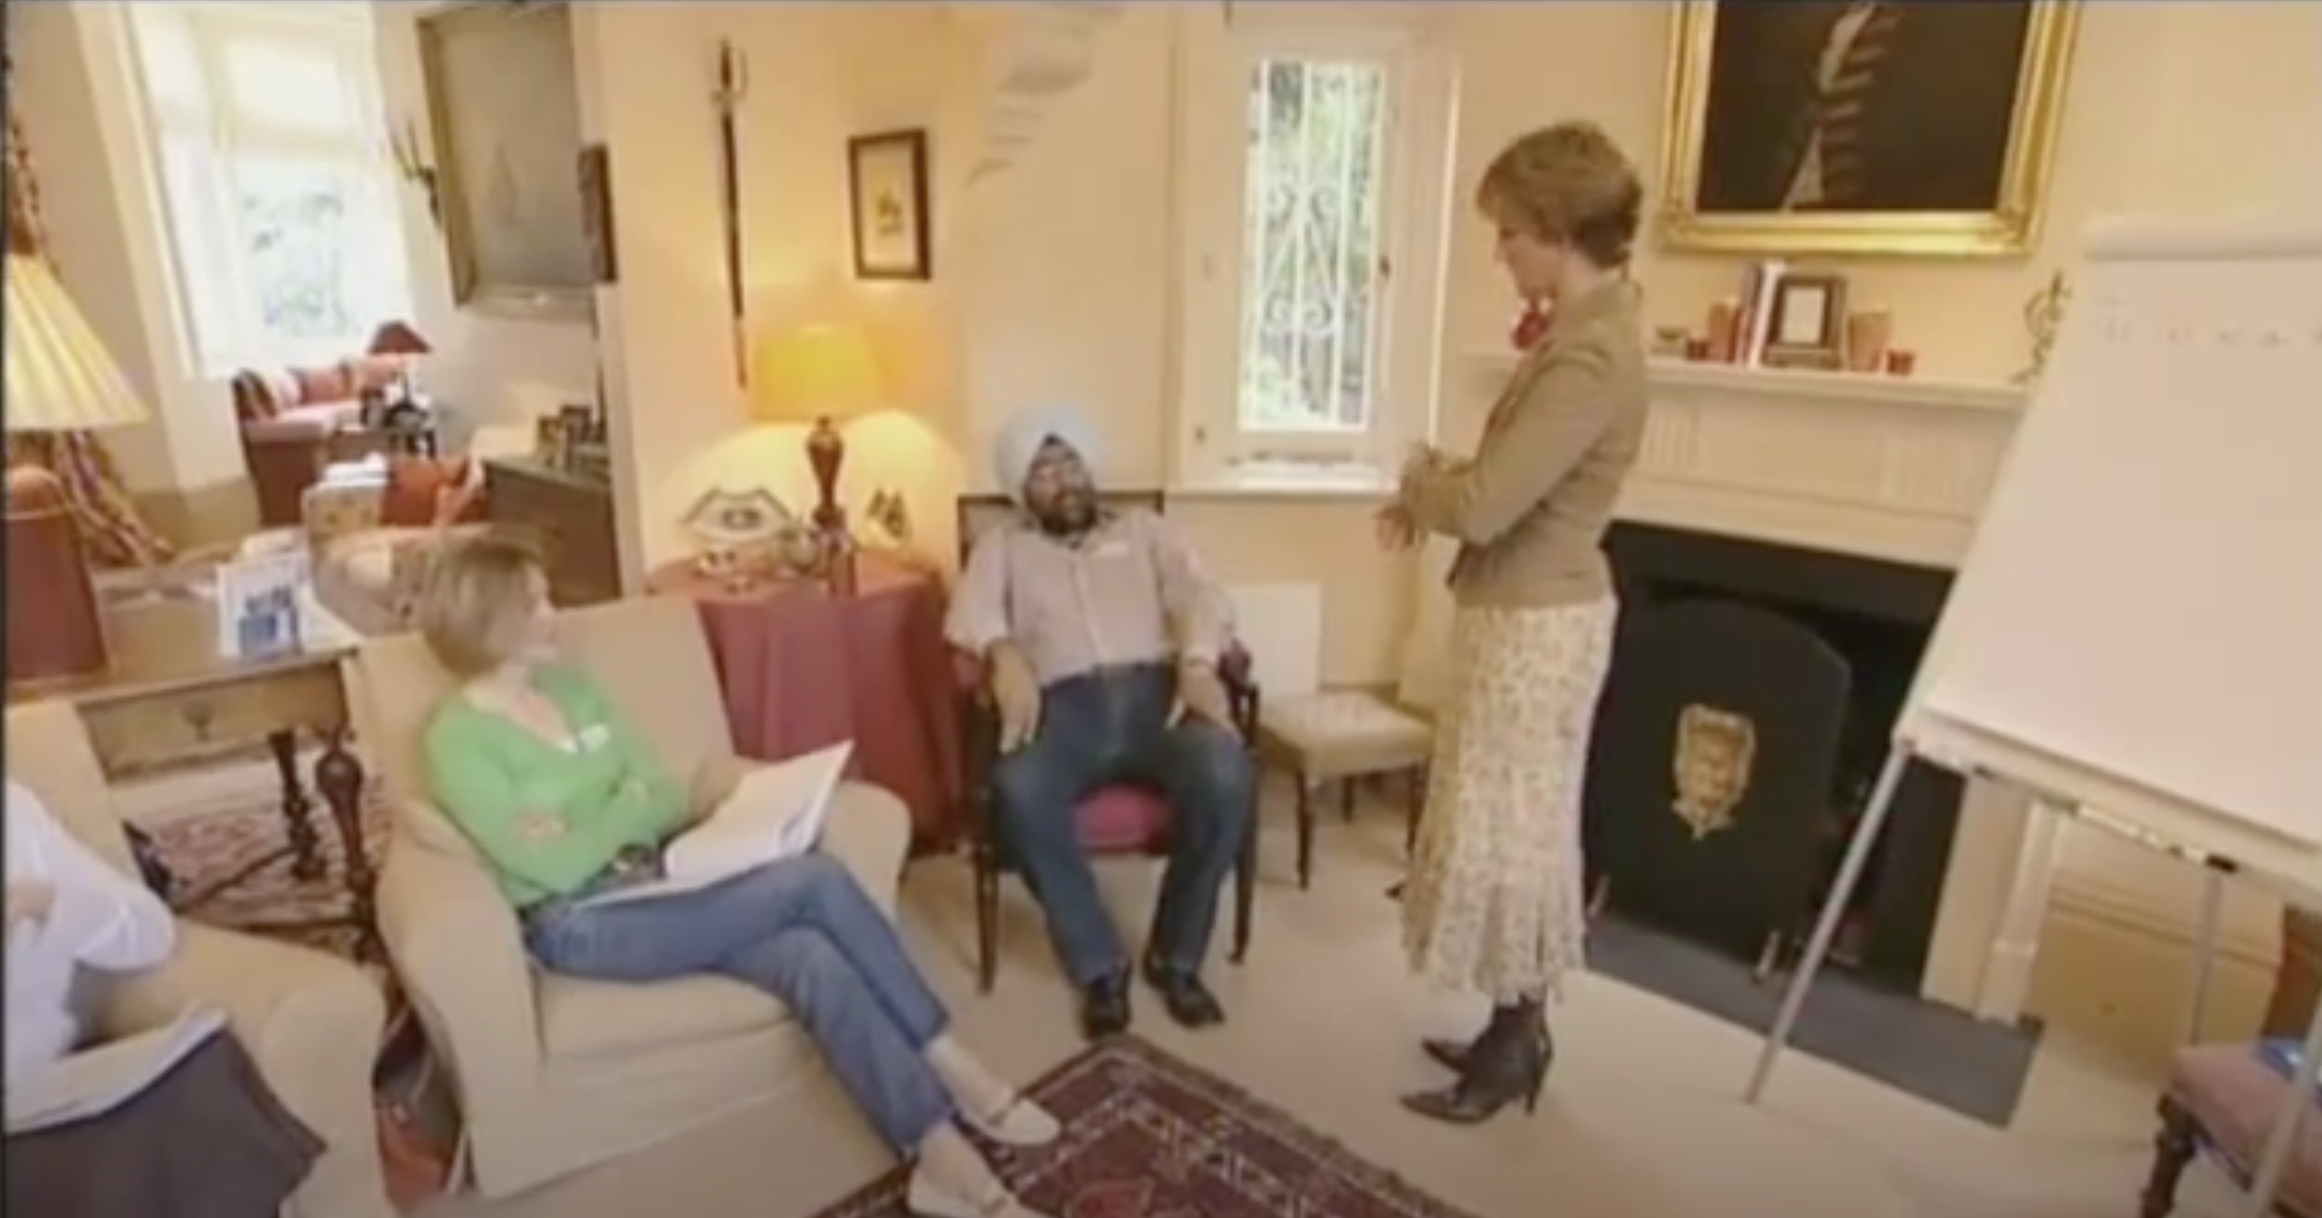 Channel 4: Parent Practice and Hardeep Does 2014